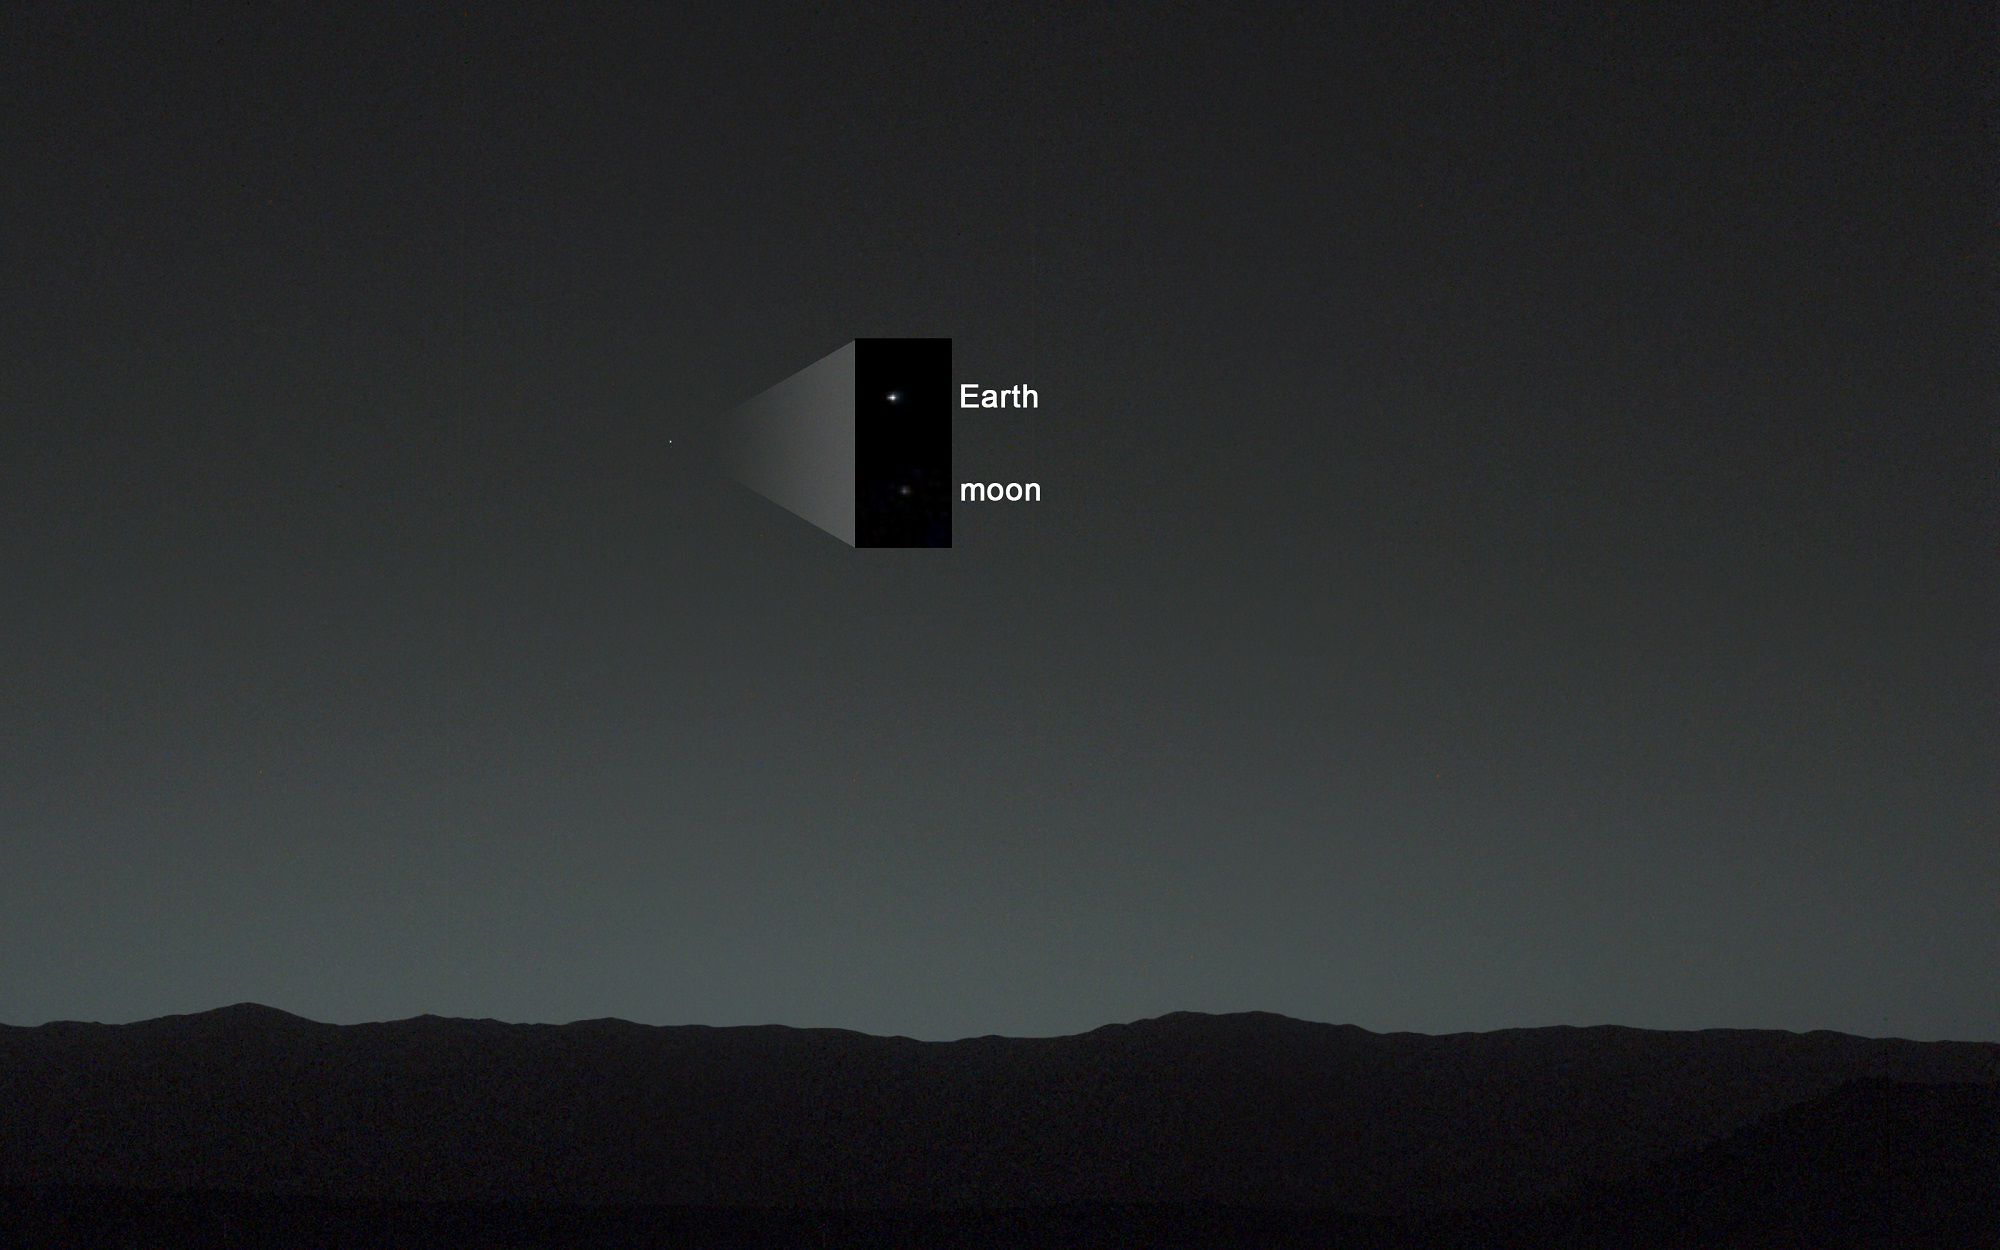 The Mars Science Laboratory Curiosity rover photographed the Earth-Moon system in 2014